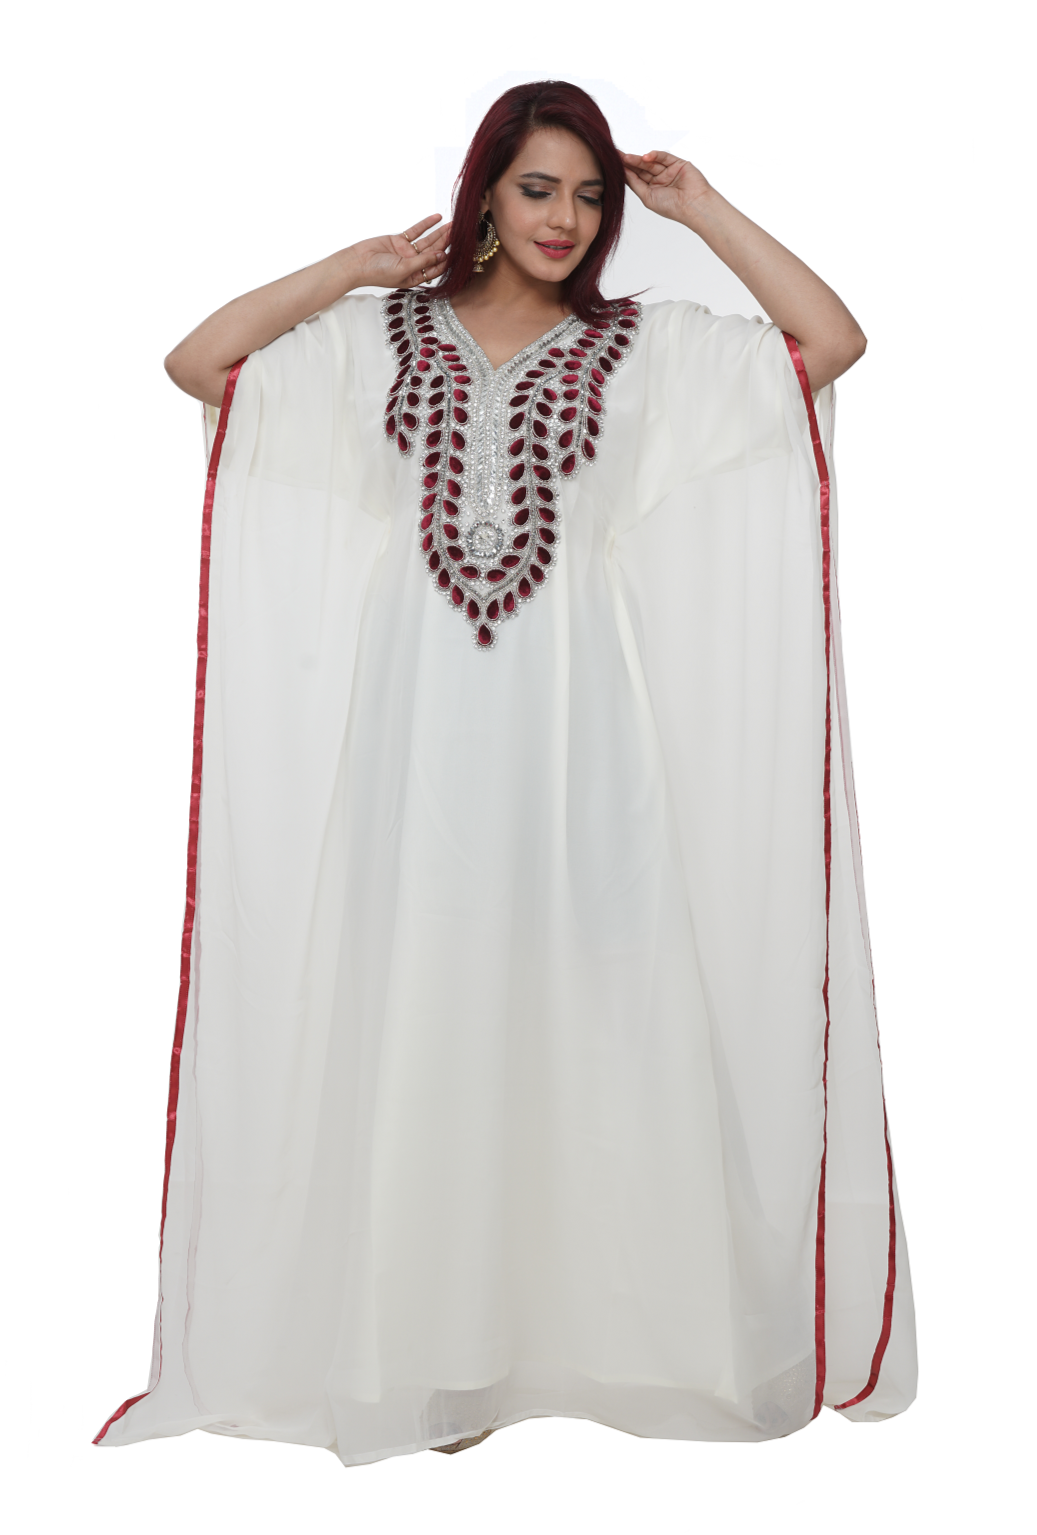 Load image into Gallery viewer, Farasha Gown with Maroon Velvet Motifs and Beads - Maxim Creation
